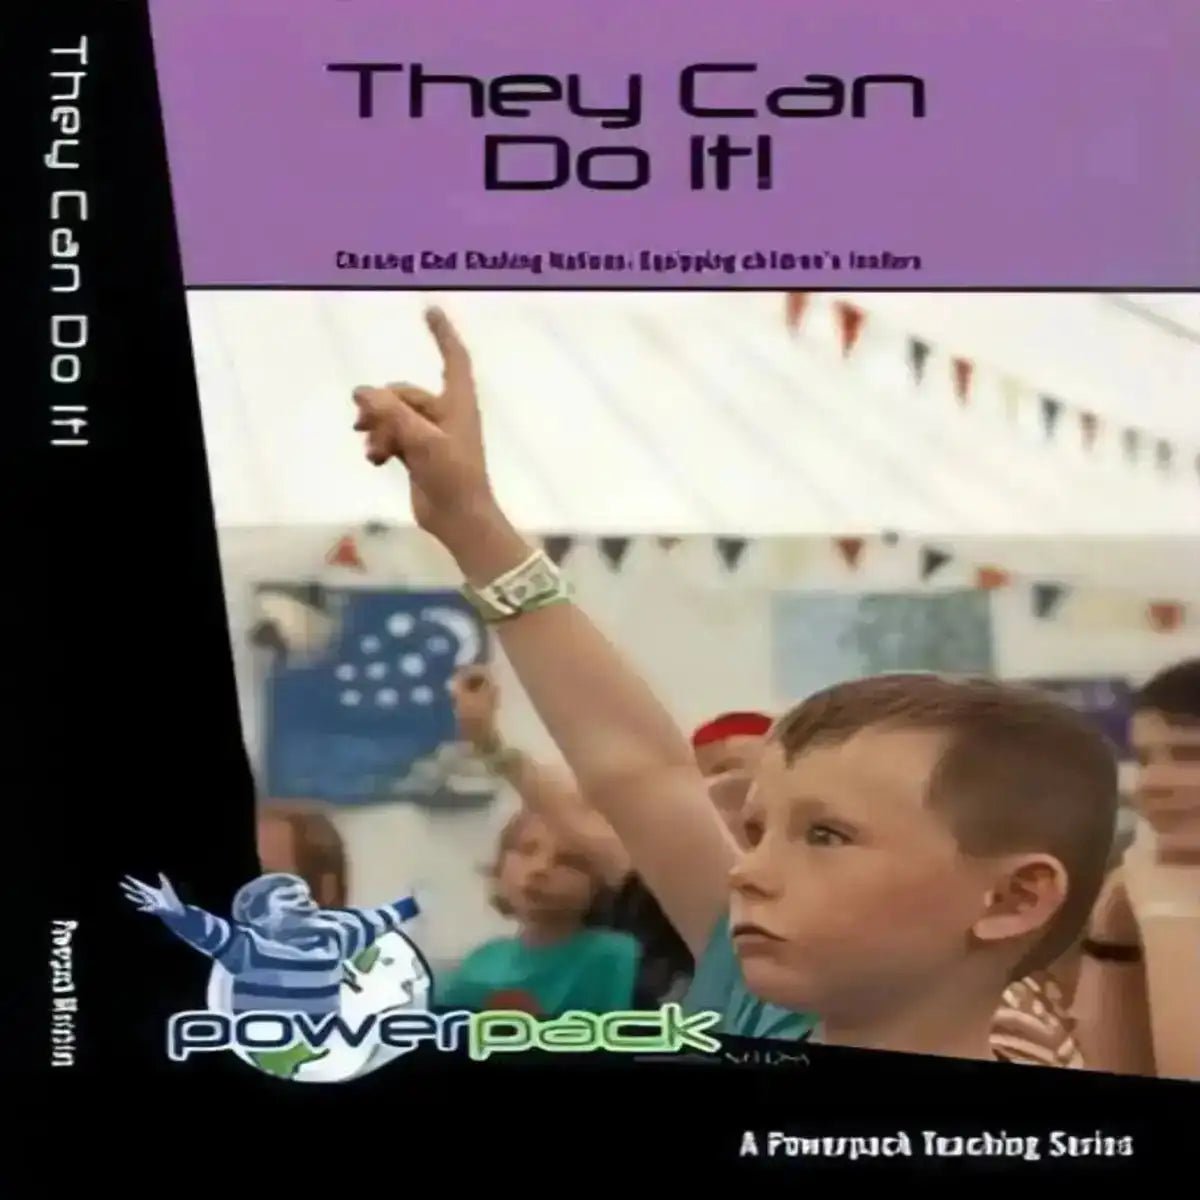 They can do it 9 Session Curriculum - Kidzconnectsa